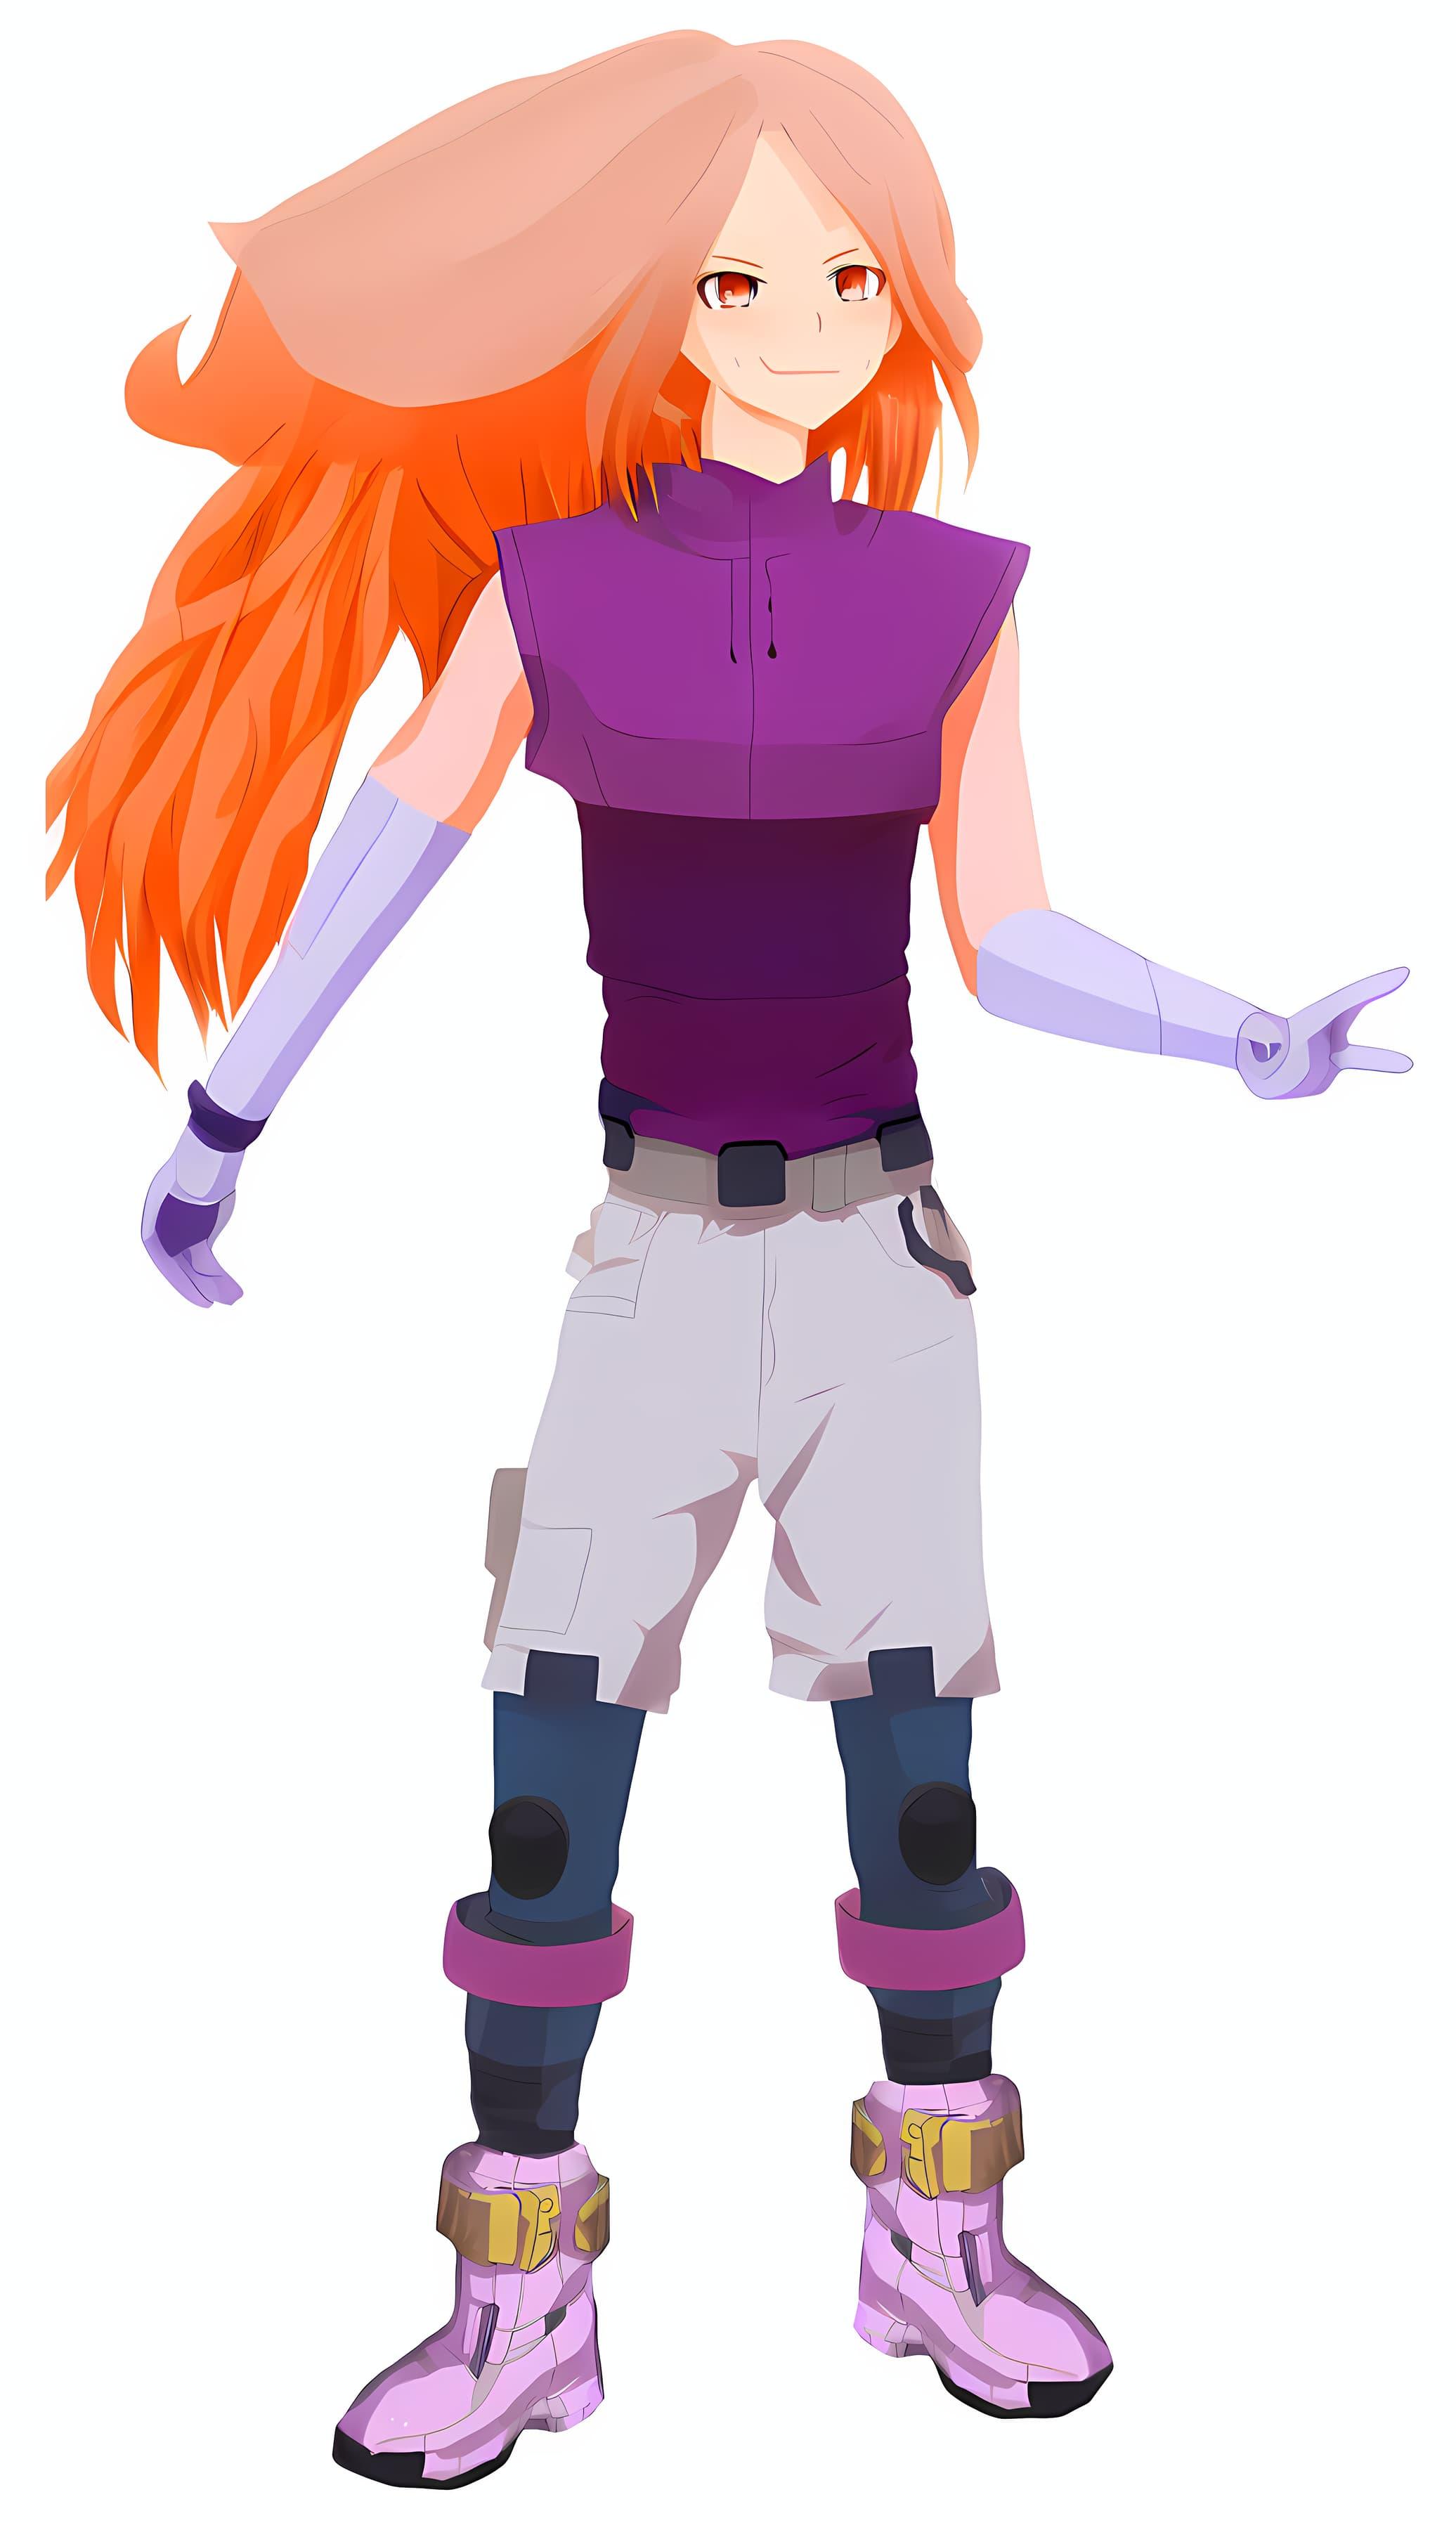 An orange-haired girl with red eyes, a purple top, lilac gloves, khaki shorts, blue robotic legs, and pink boots, on a white background. She's smirking and holding up a peace sign with her hand